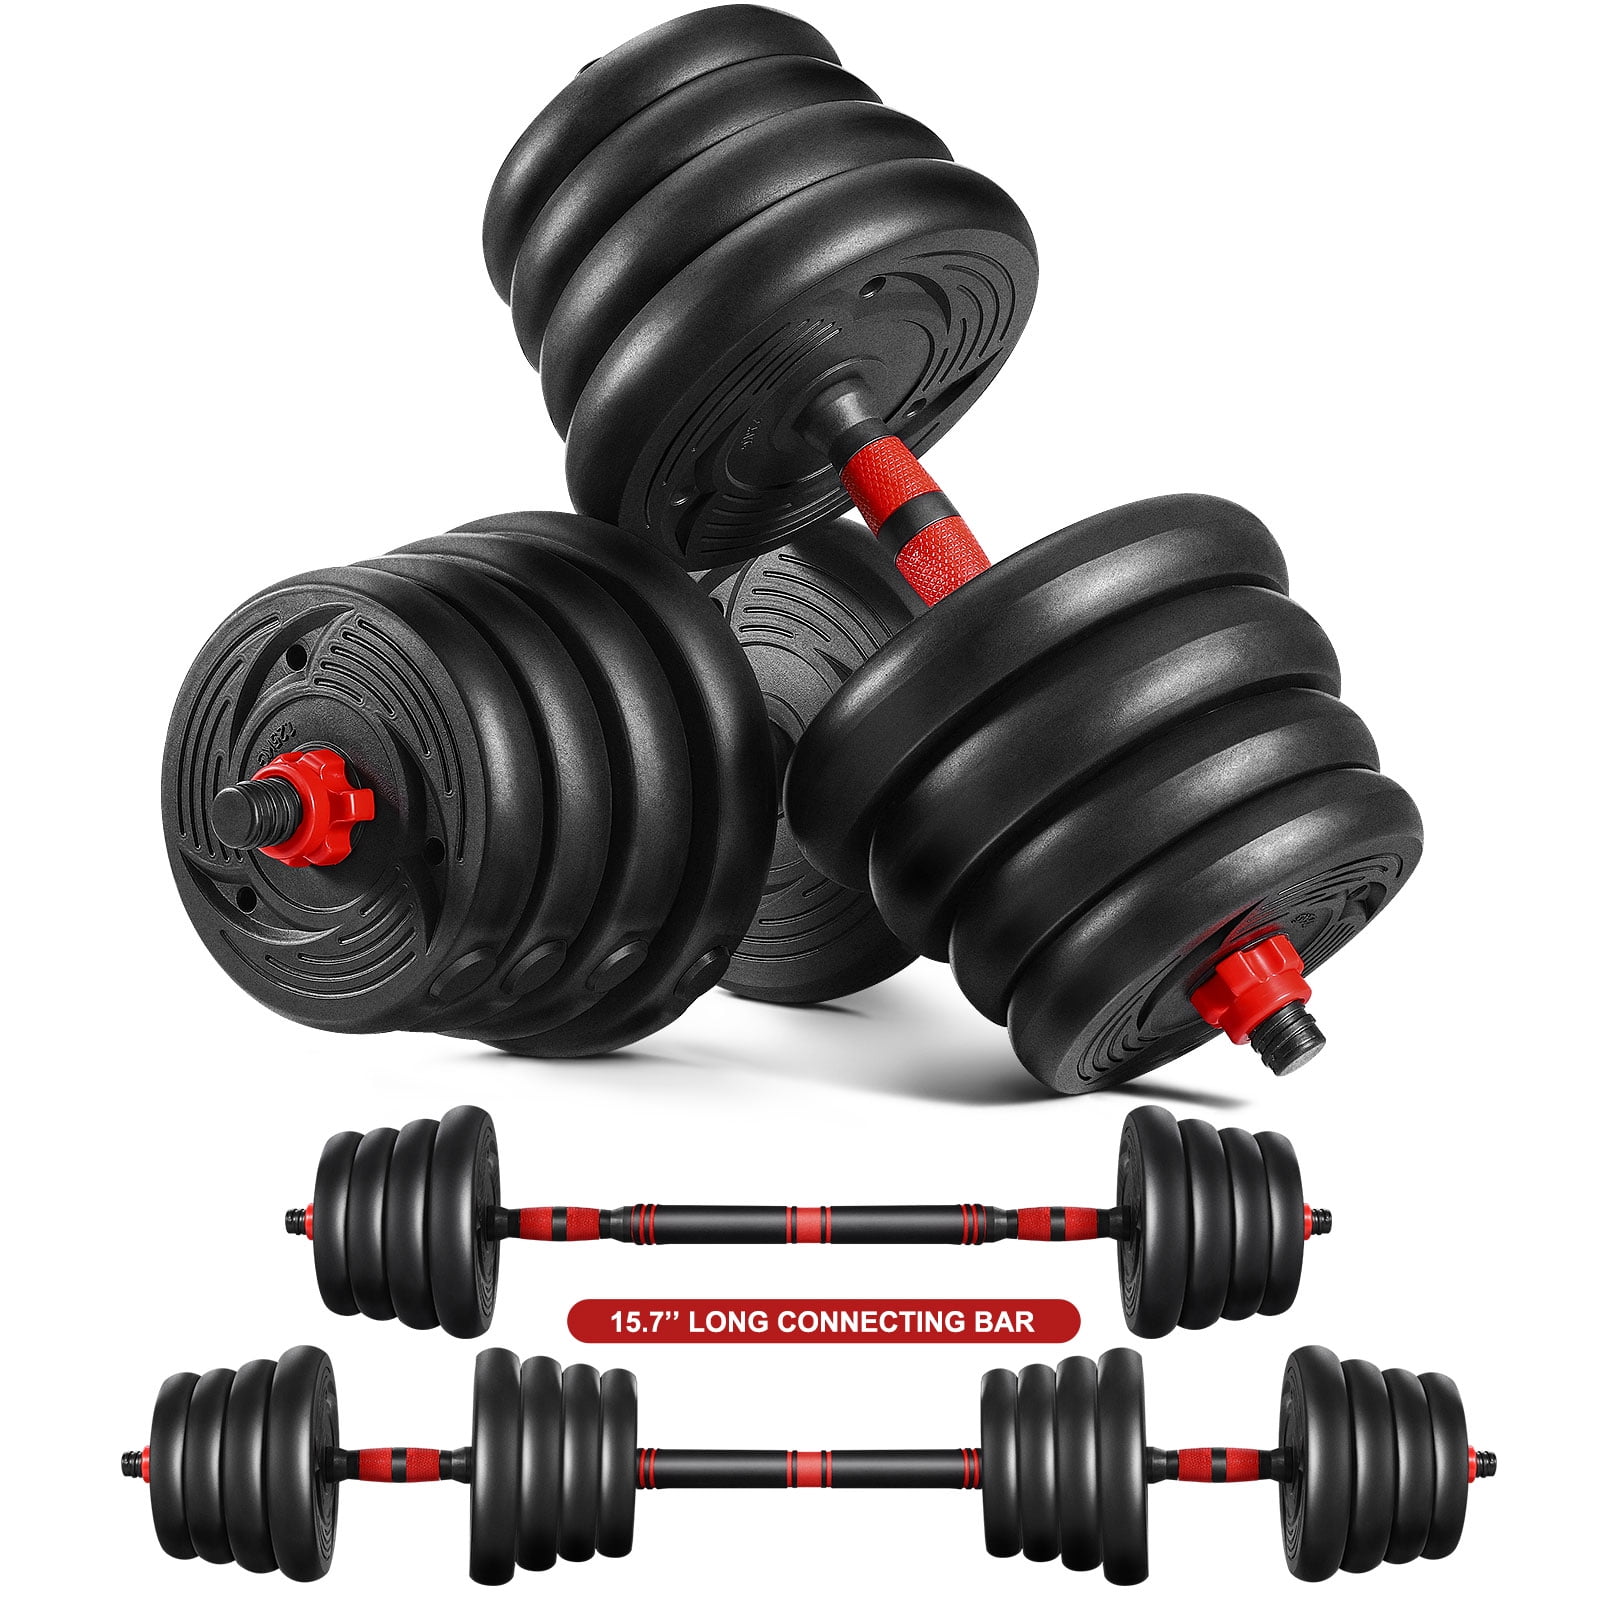 Workout MOVTOTOP Adjustable Fitness Dumbbells Set 2 Pieces/Set Whole Body Training 30KG Free Weights Dumbbells with 15.7 inch Connecting Rod Used As Barbell for Home Gym 